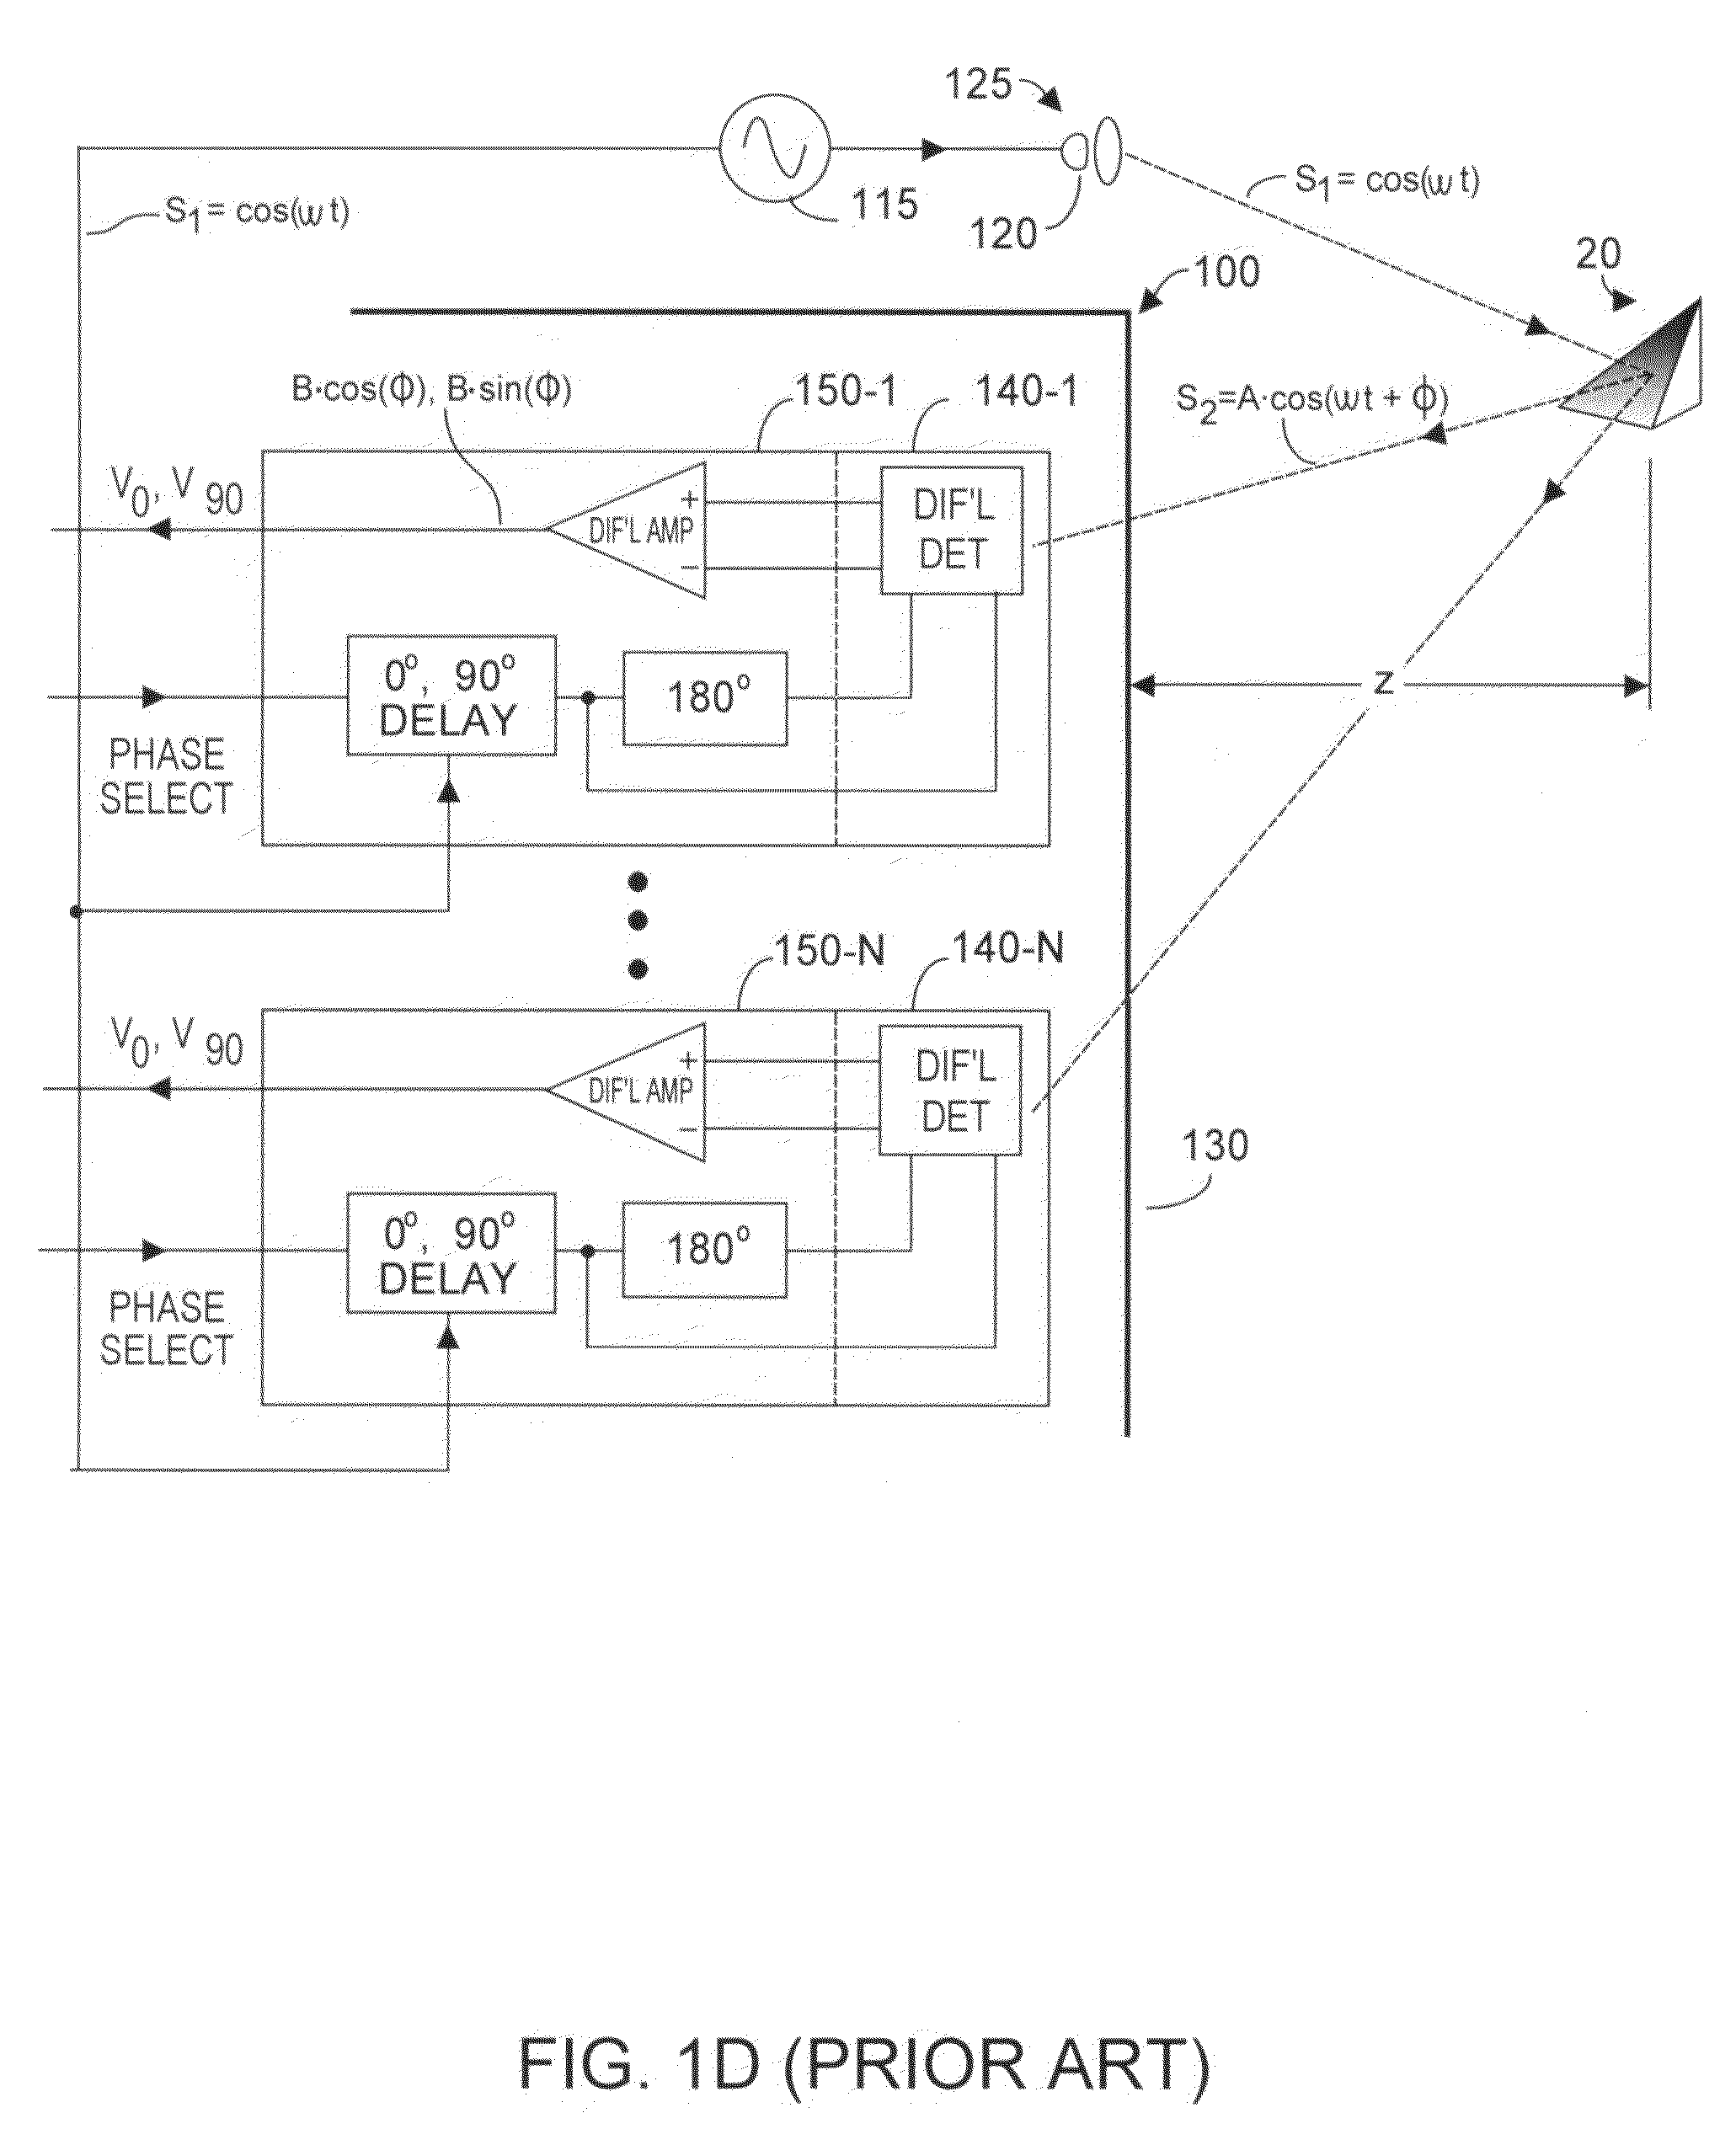 Method and system to avoid inter-system interference for phase-based time-of-flight systems